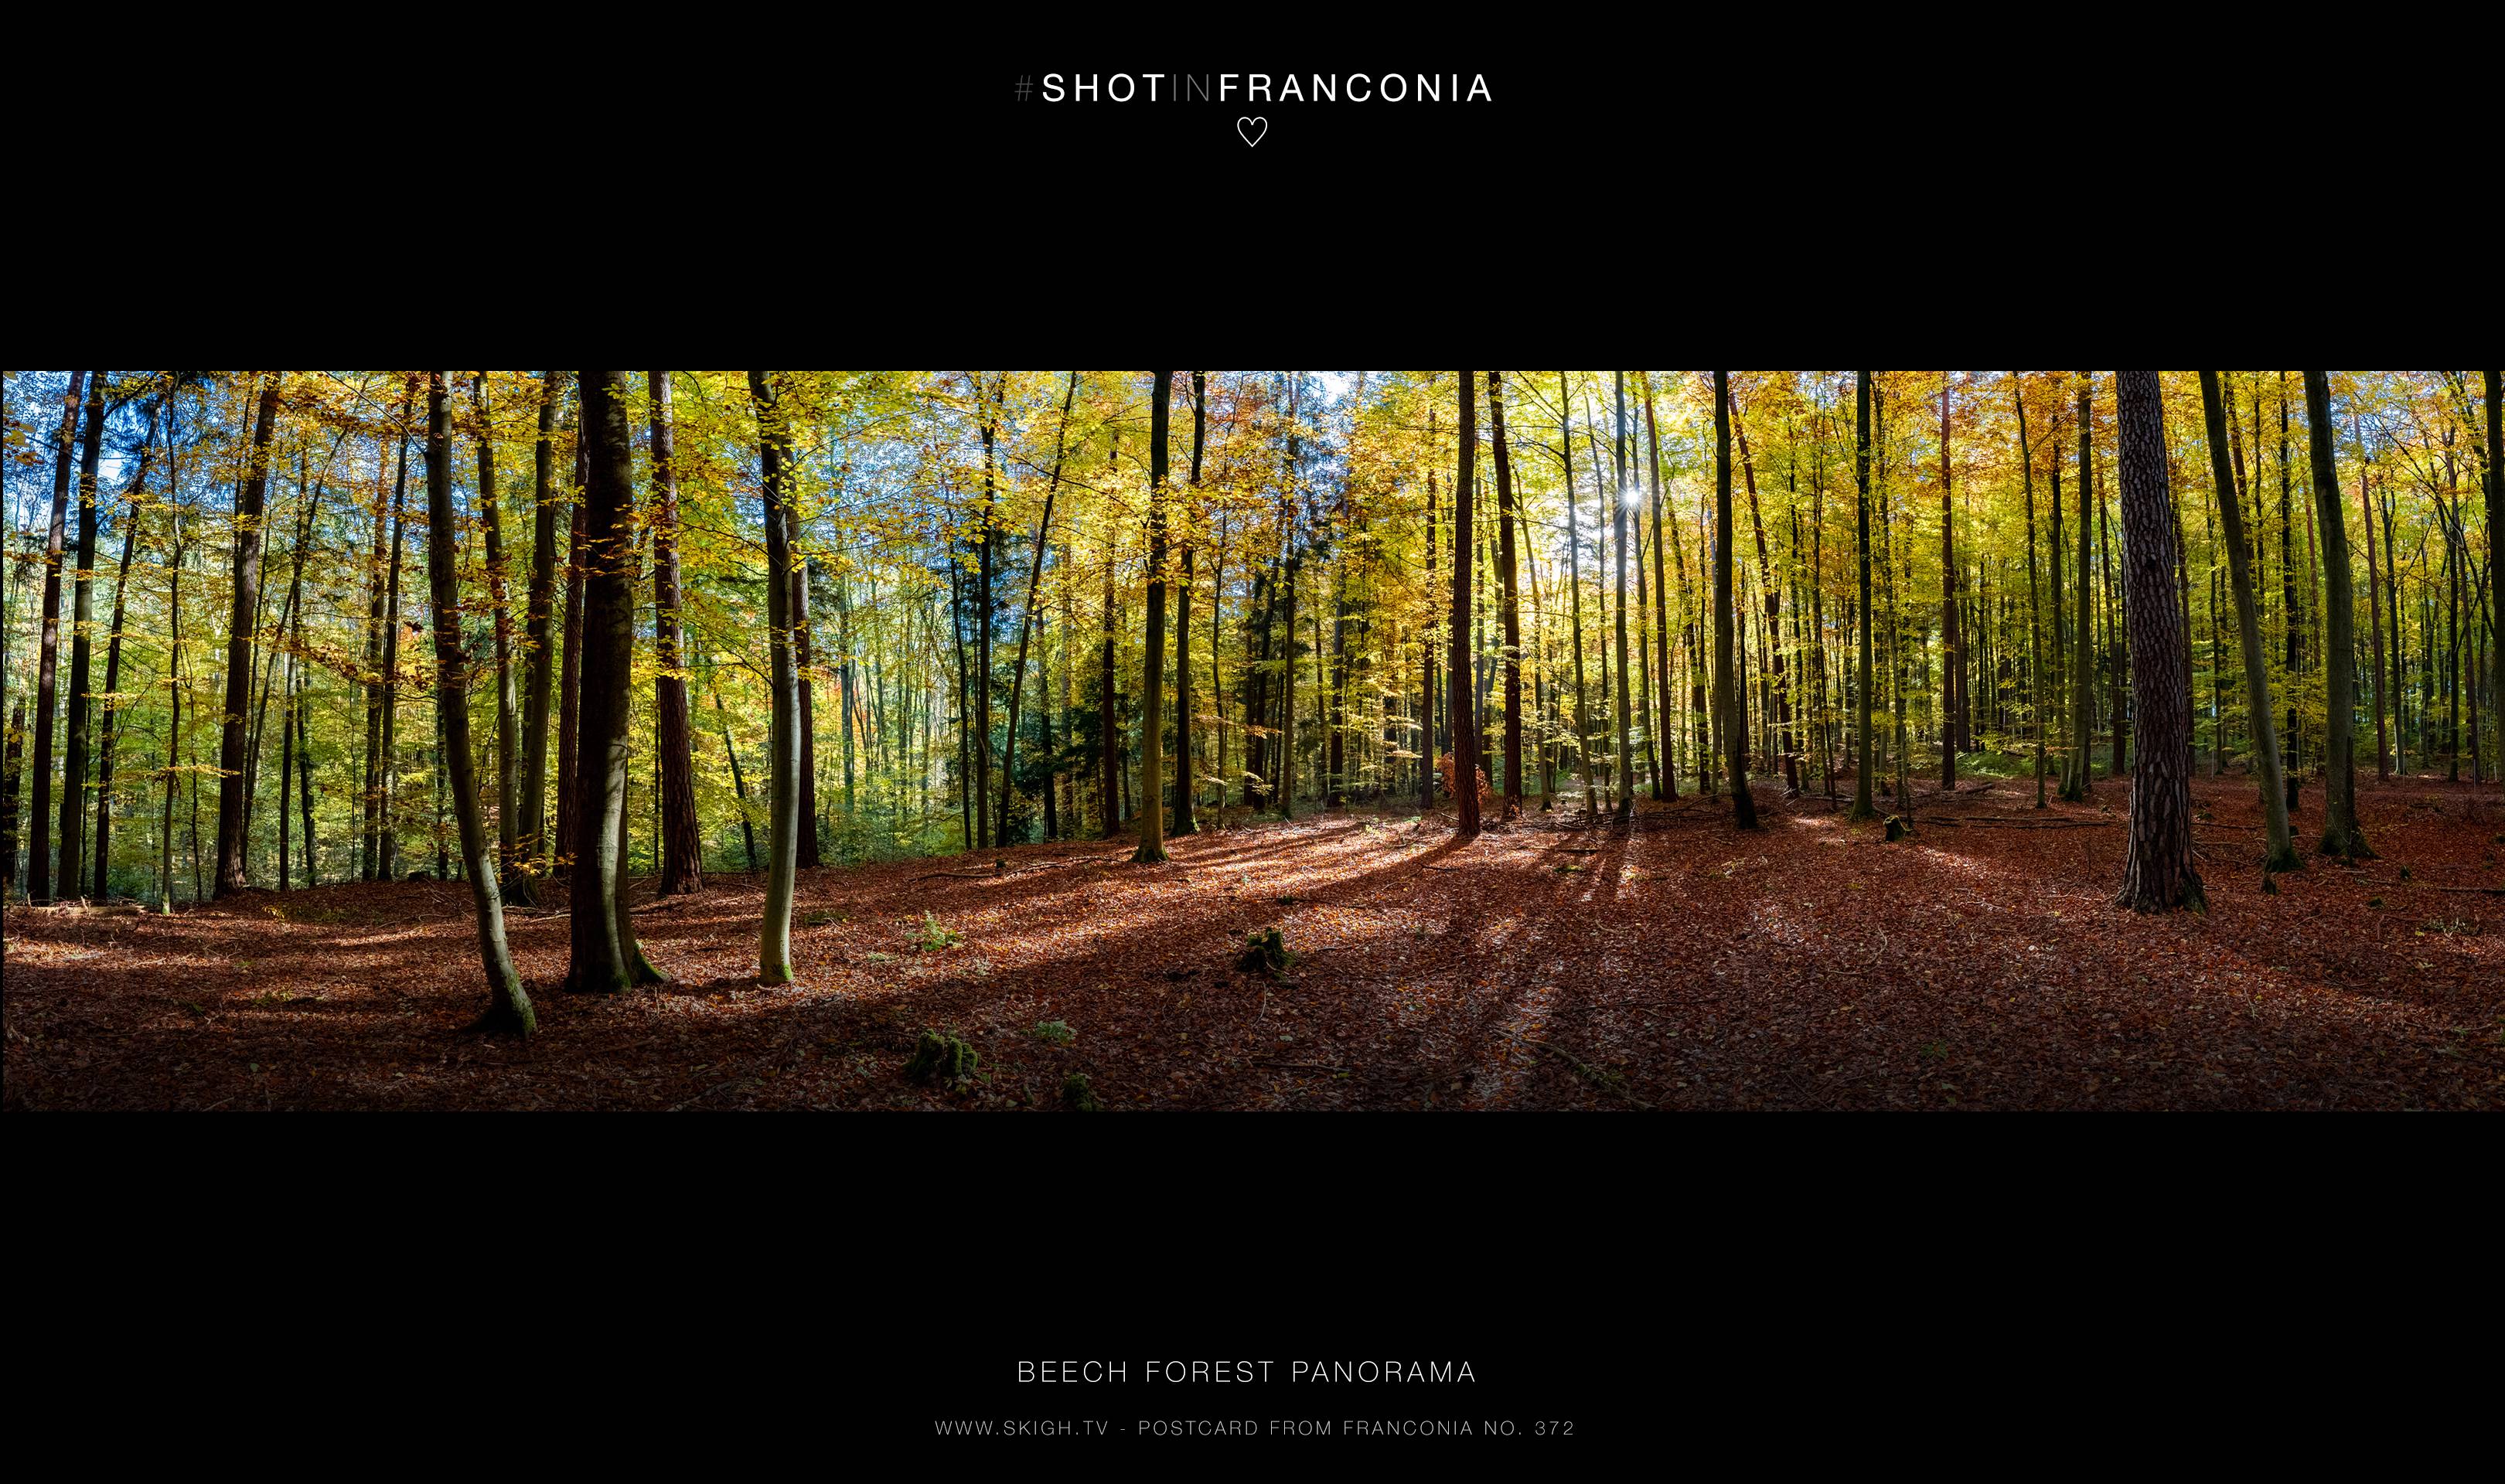 Beech Forest Panorama